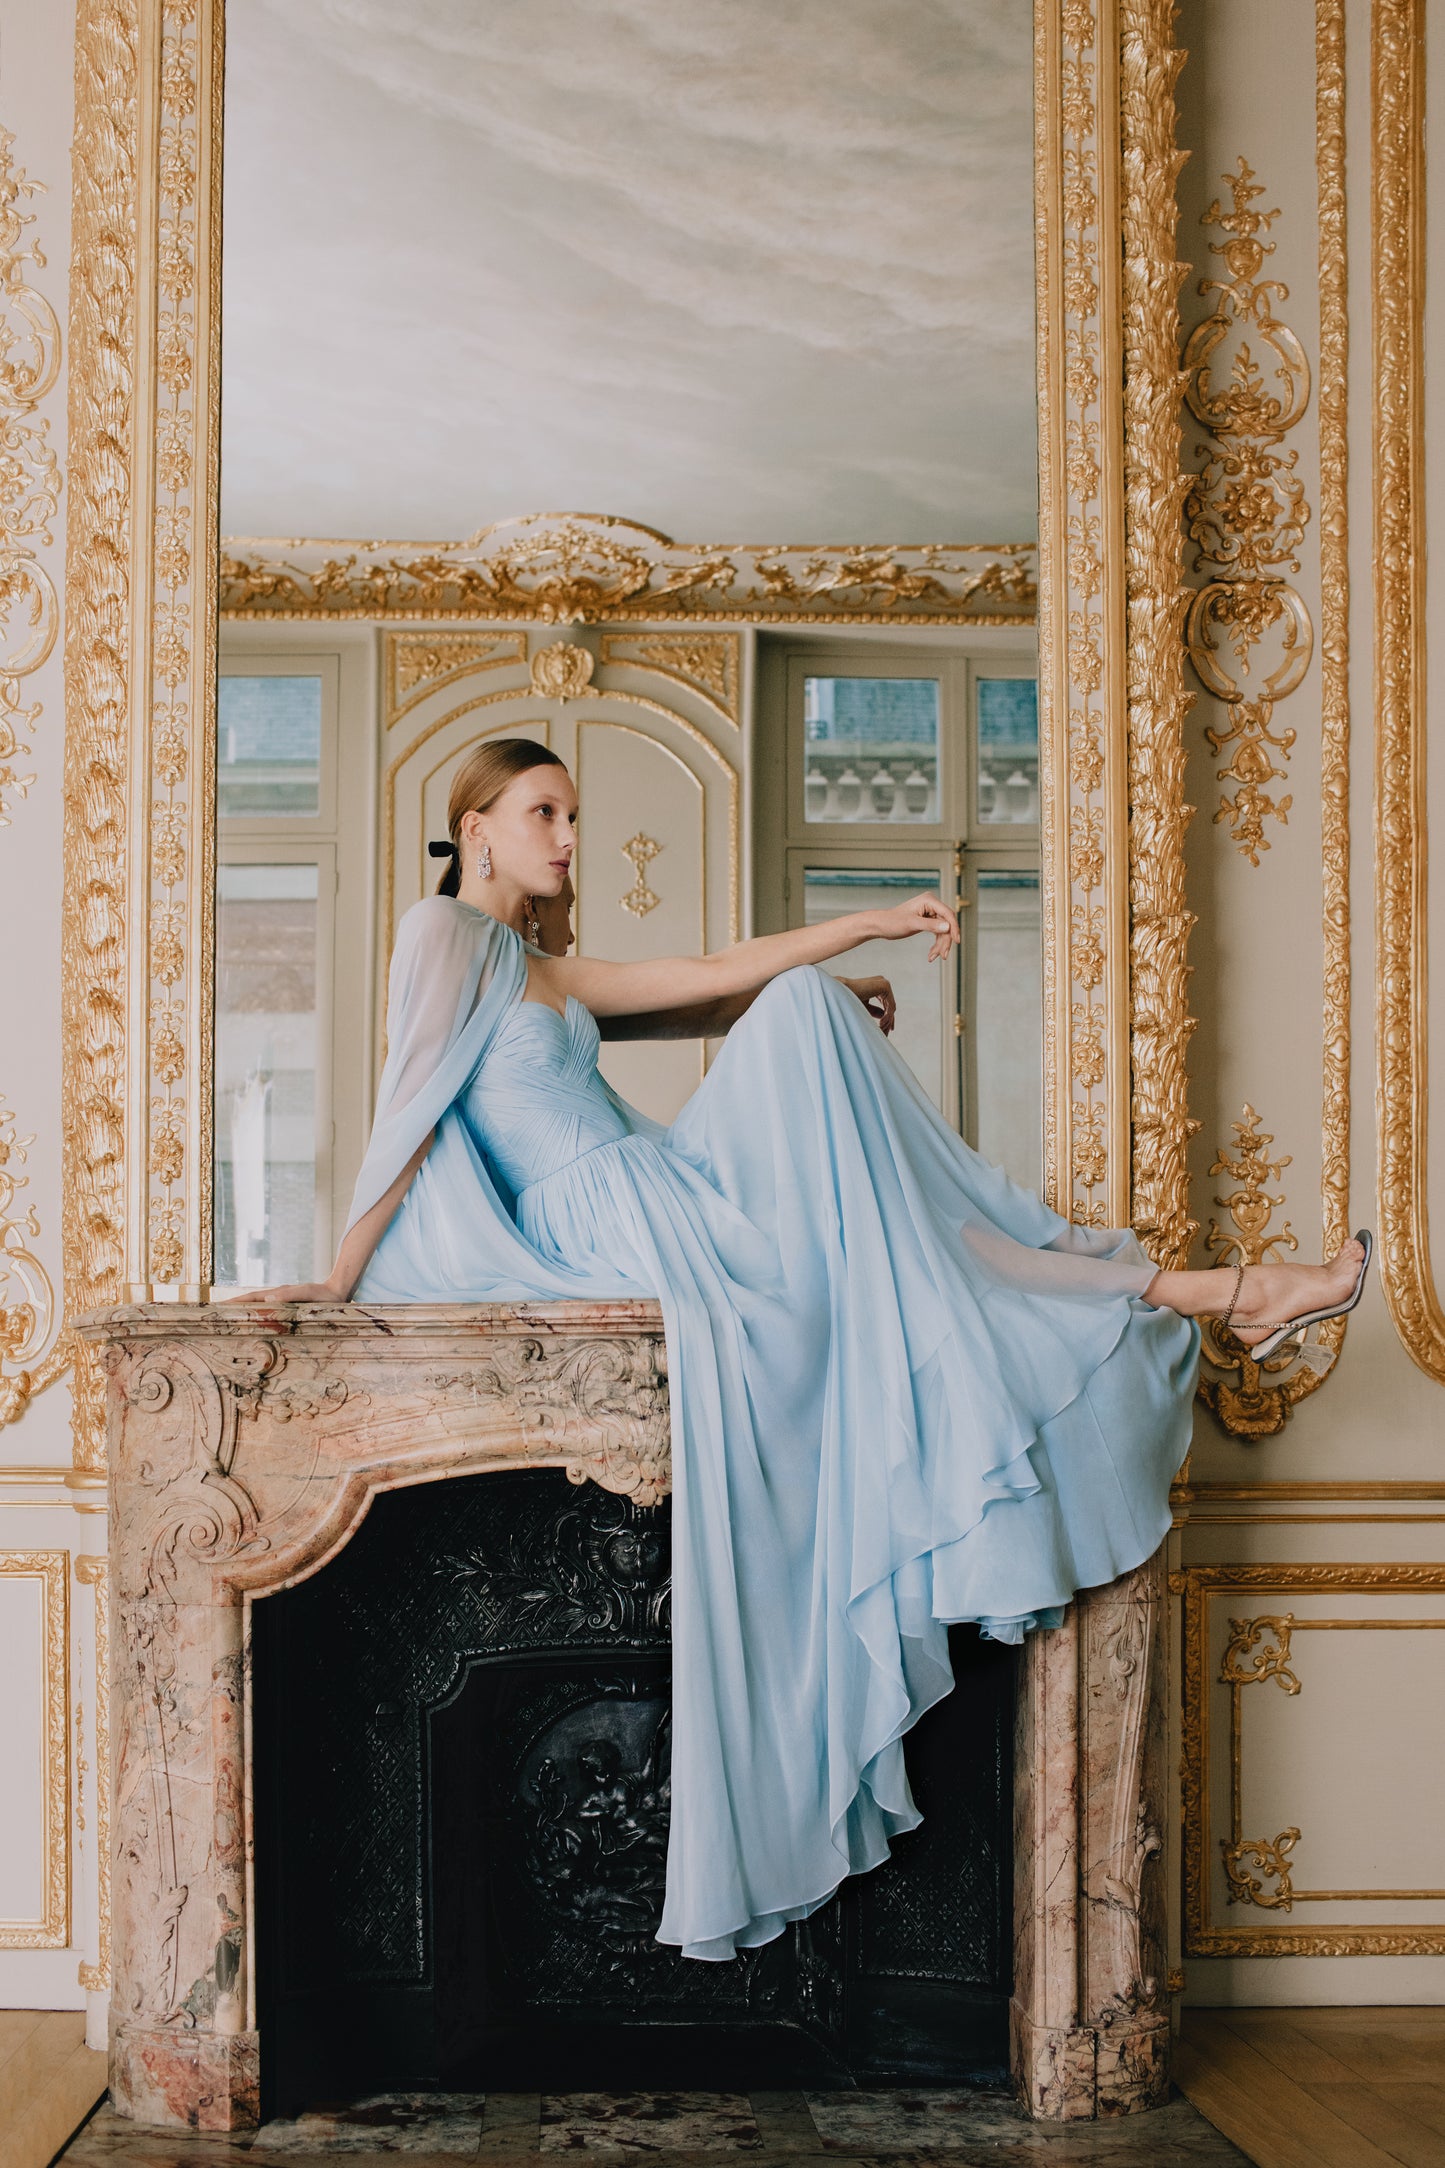 Monique Lhuillier pale blue chiffon gown and sheer cape look book photo.